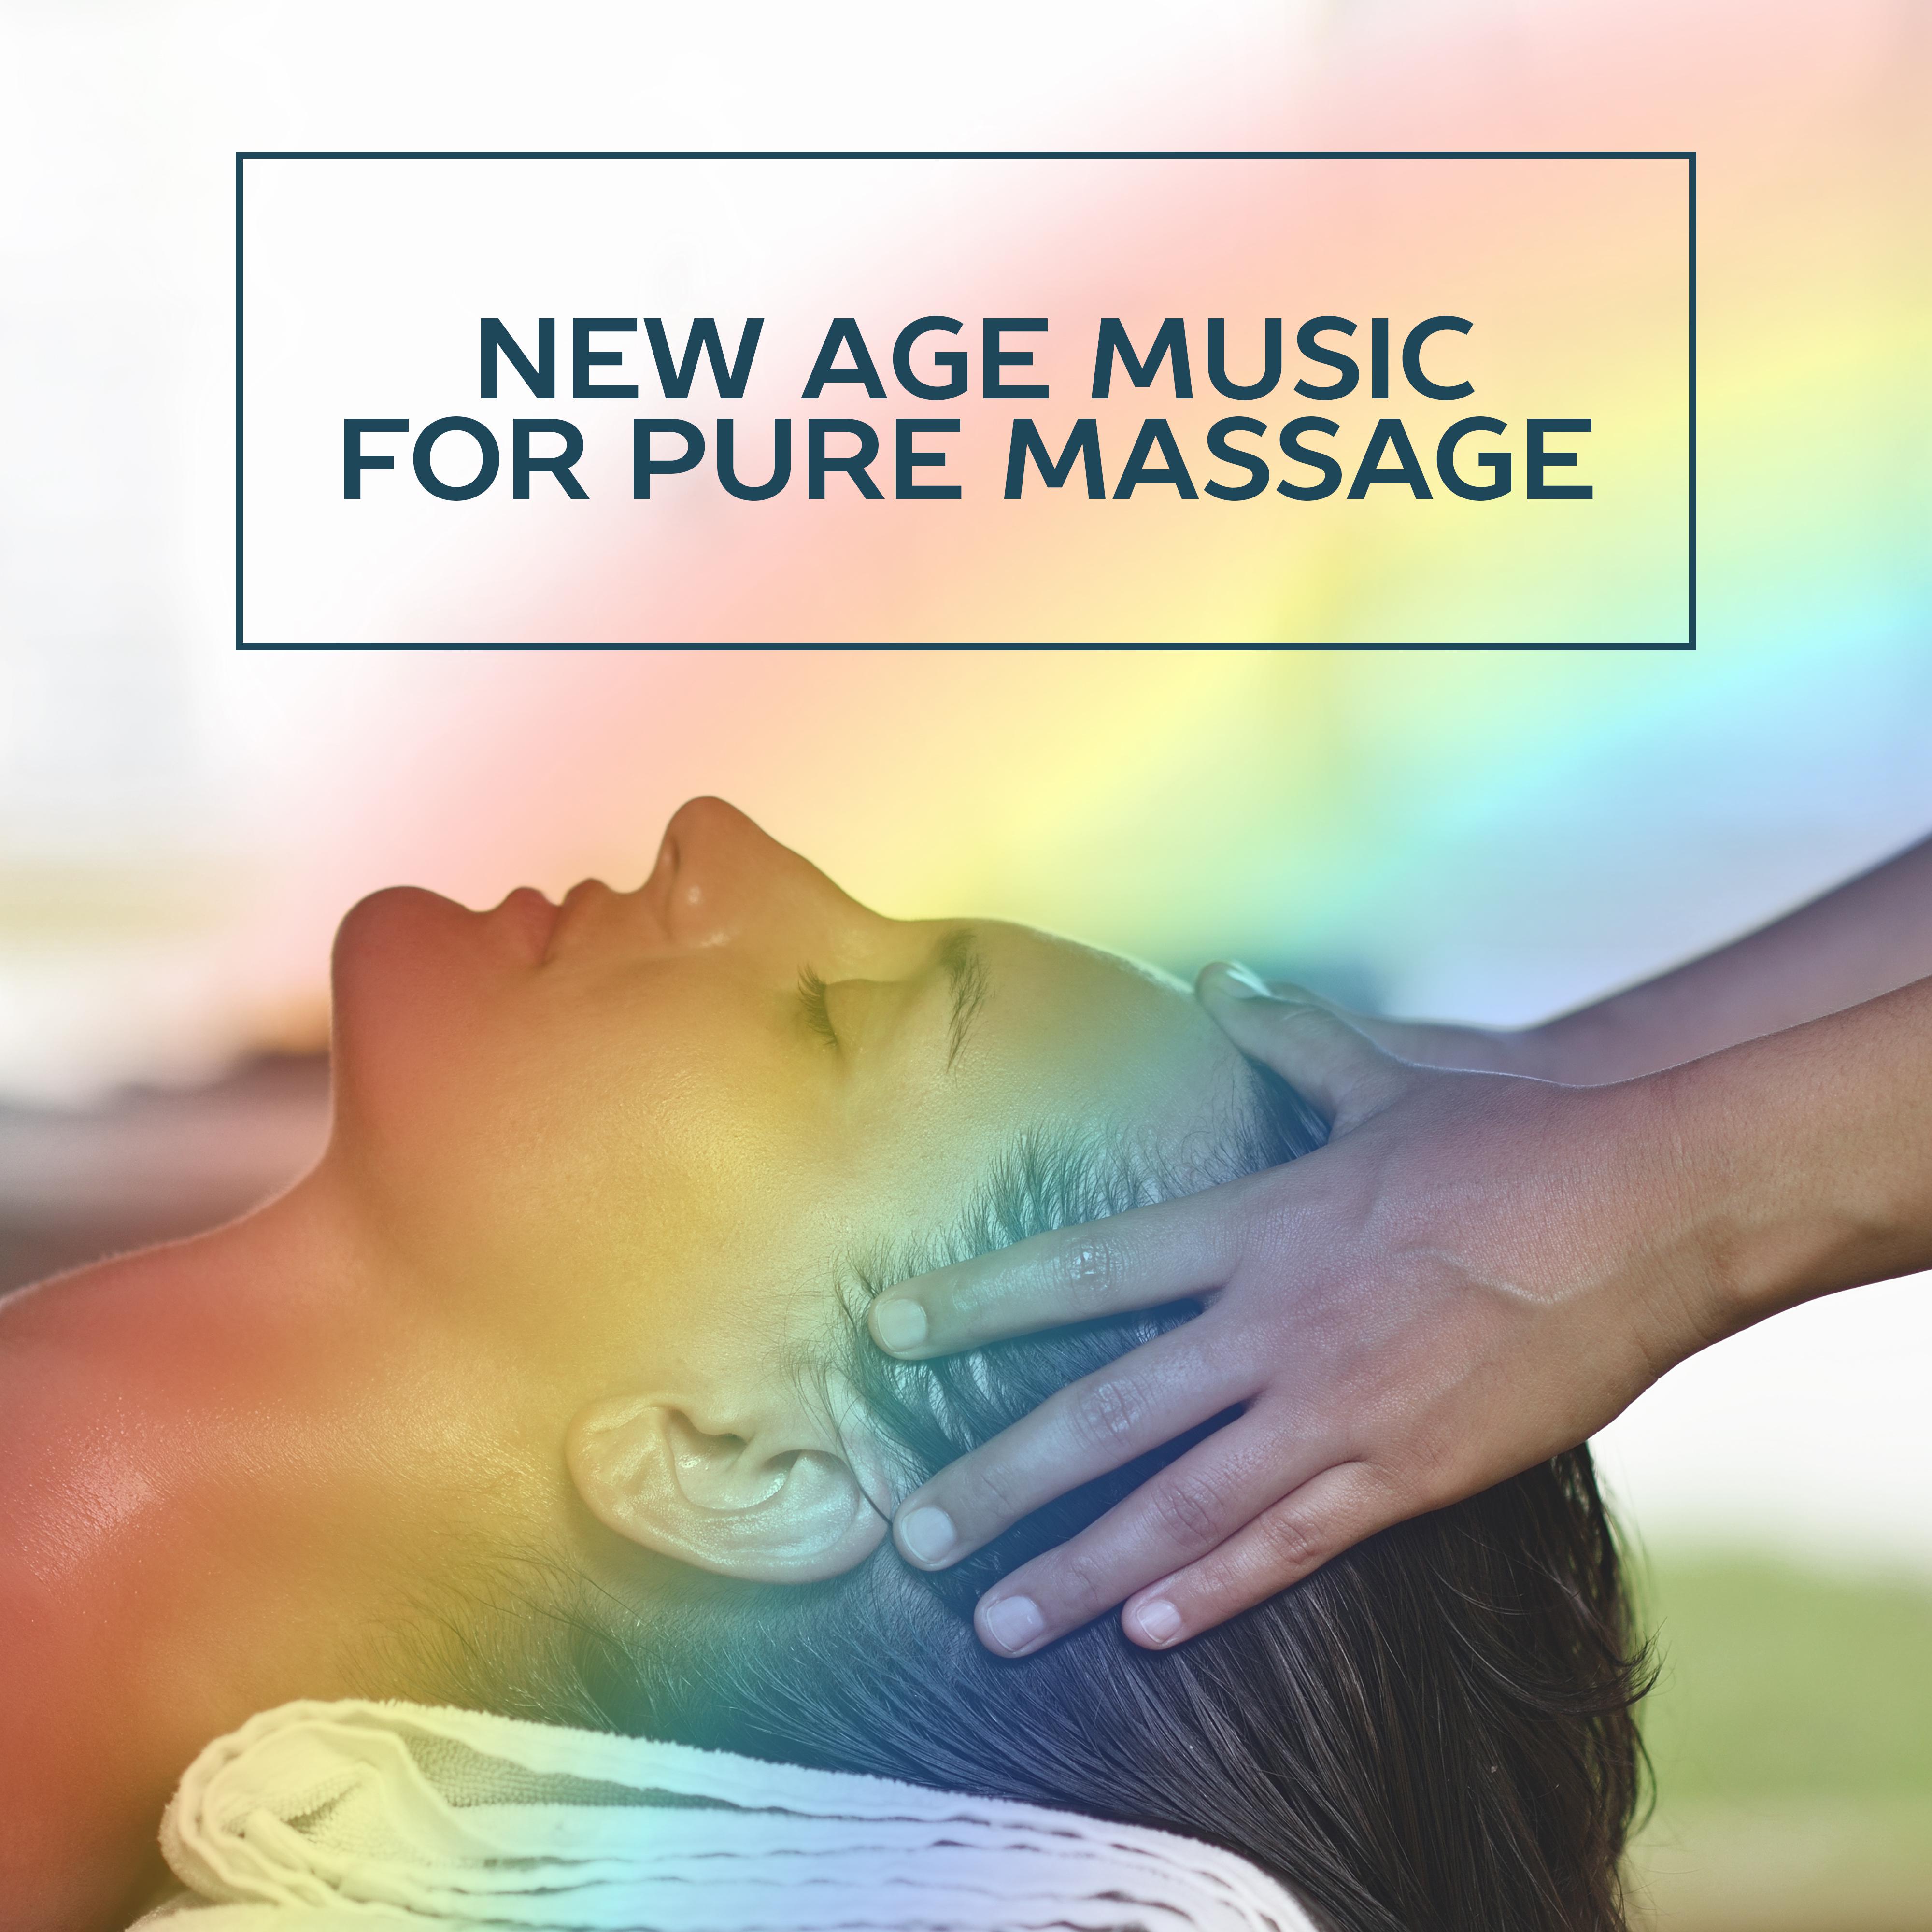 New Age Music for Pure Massage  Nature Sounds to Calm Down, Stress Relief, Healing Spa, Wellness, Relaxing Therapy for Body, Ocean Waves